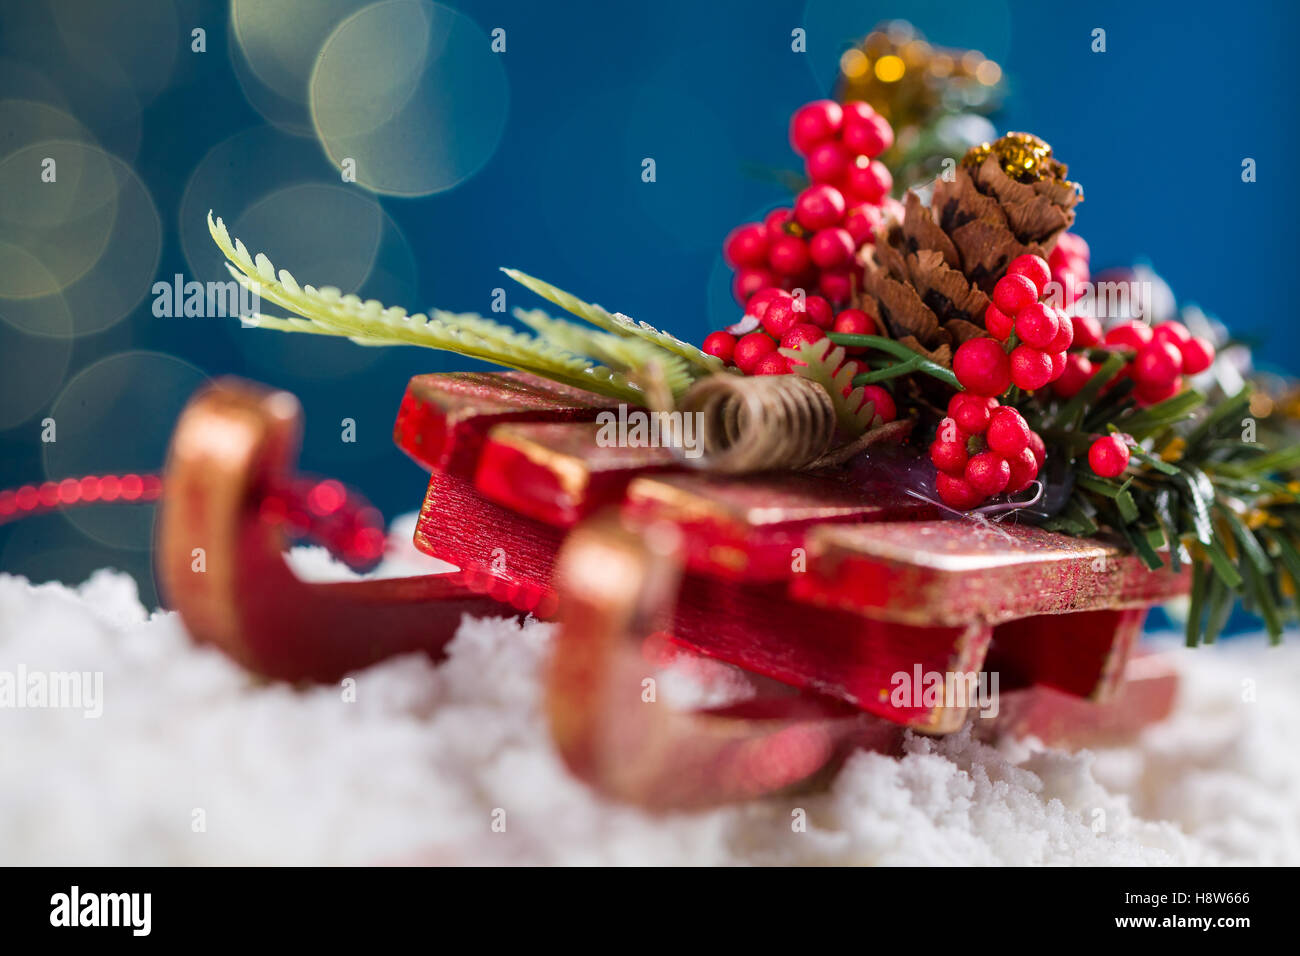 Decorative sleigh with roan-tree and christmas tree branches, driving on snow, in the background the beautiful bokech balls. Stock Photo